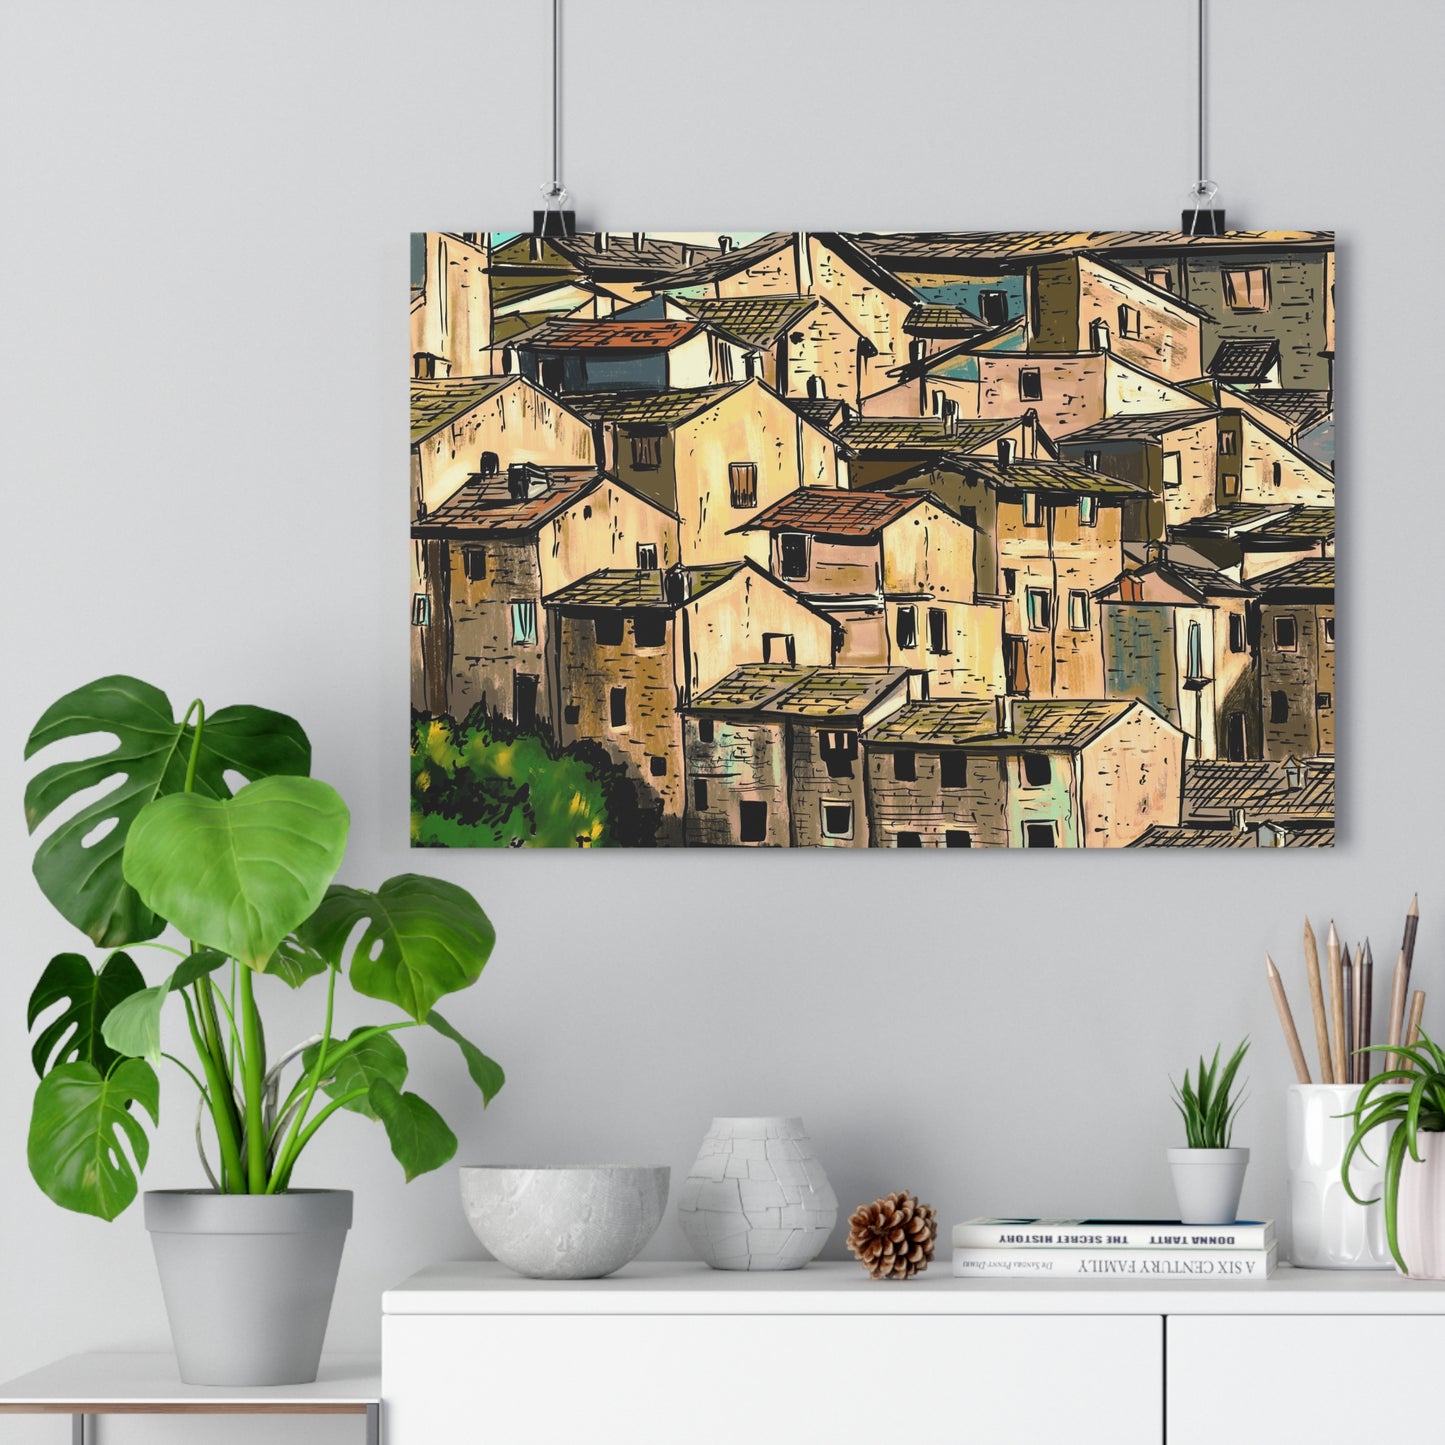 A Majestic View of Scanno, Italy - Premium Poster